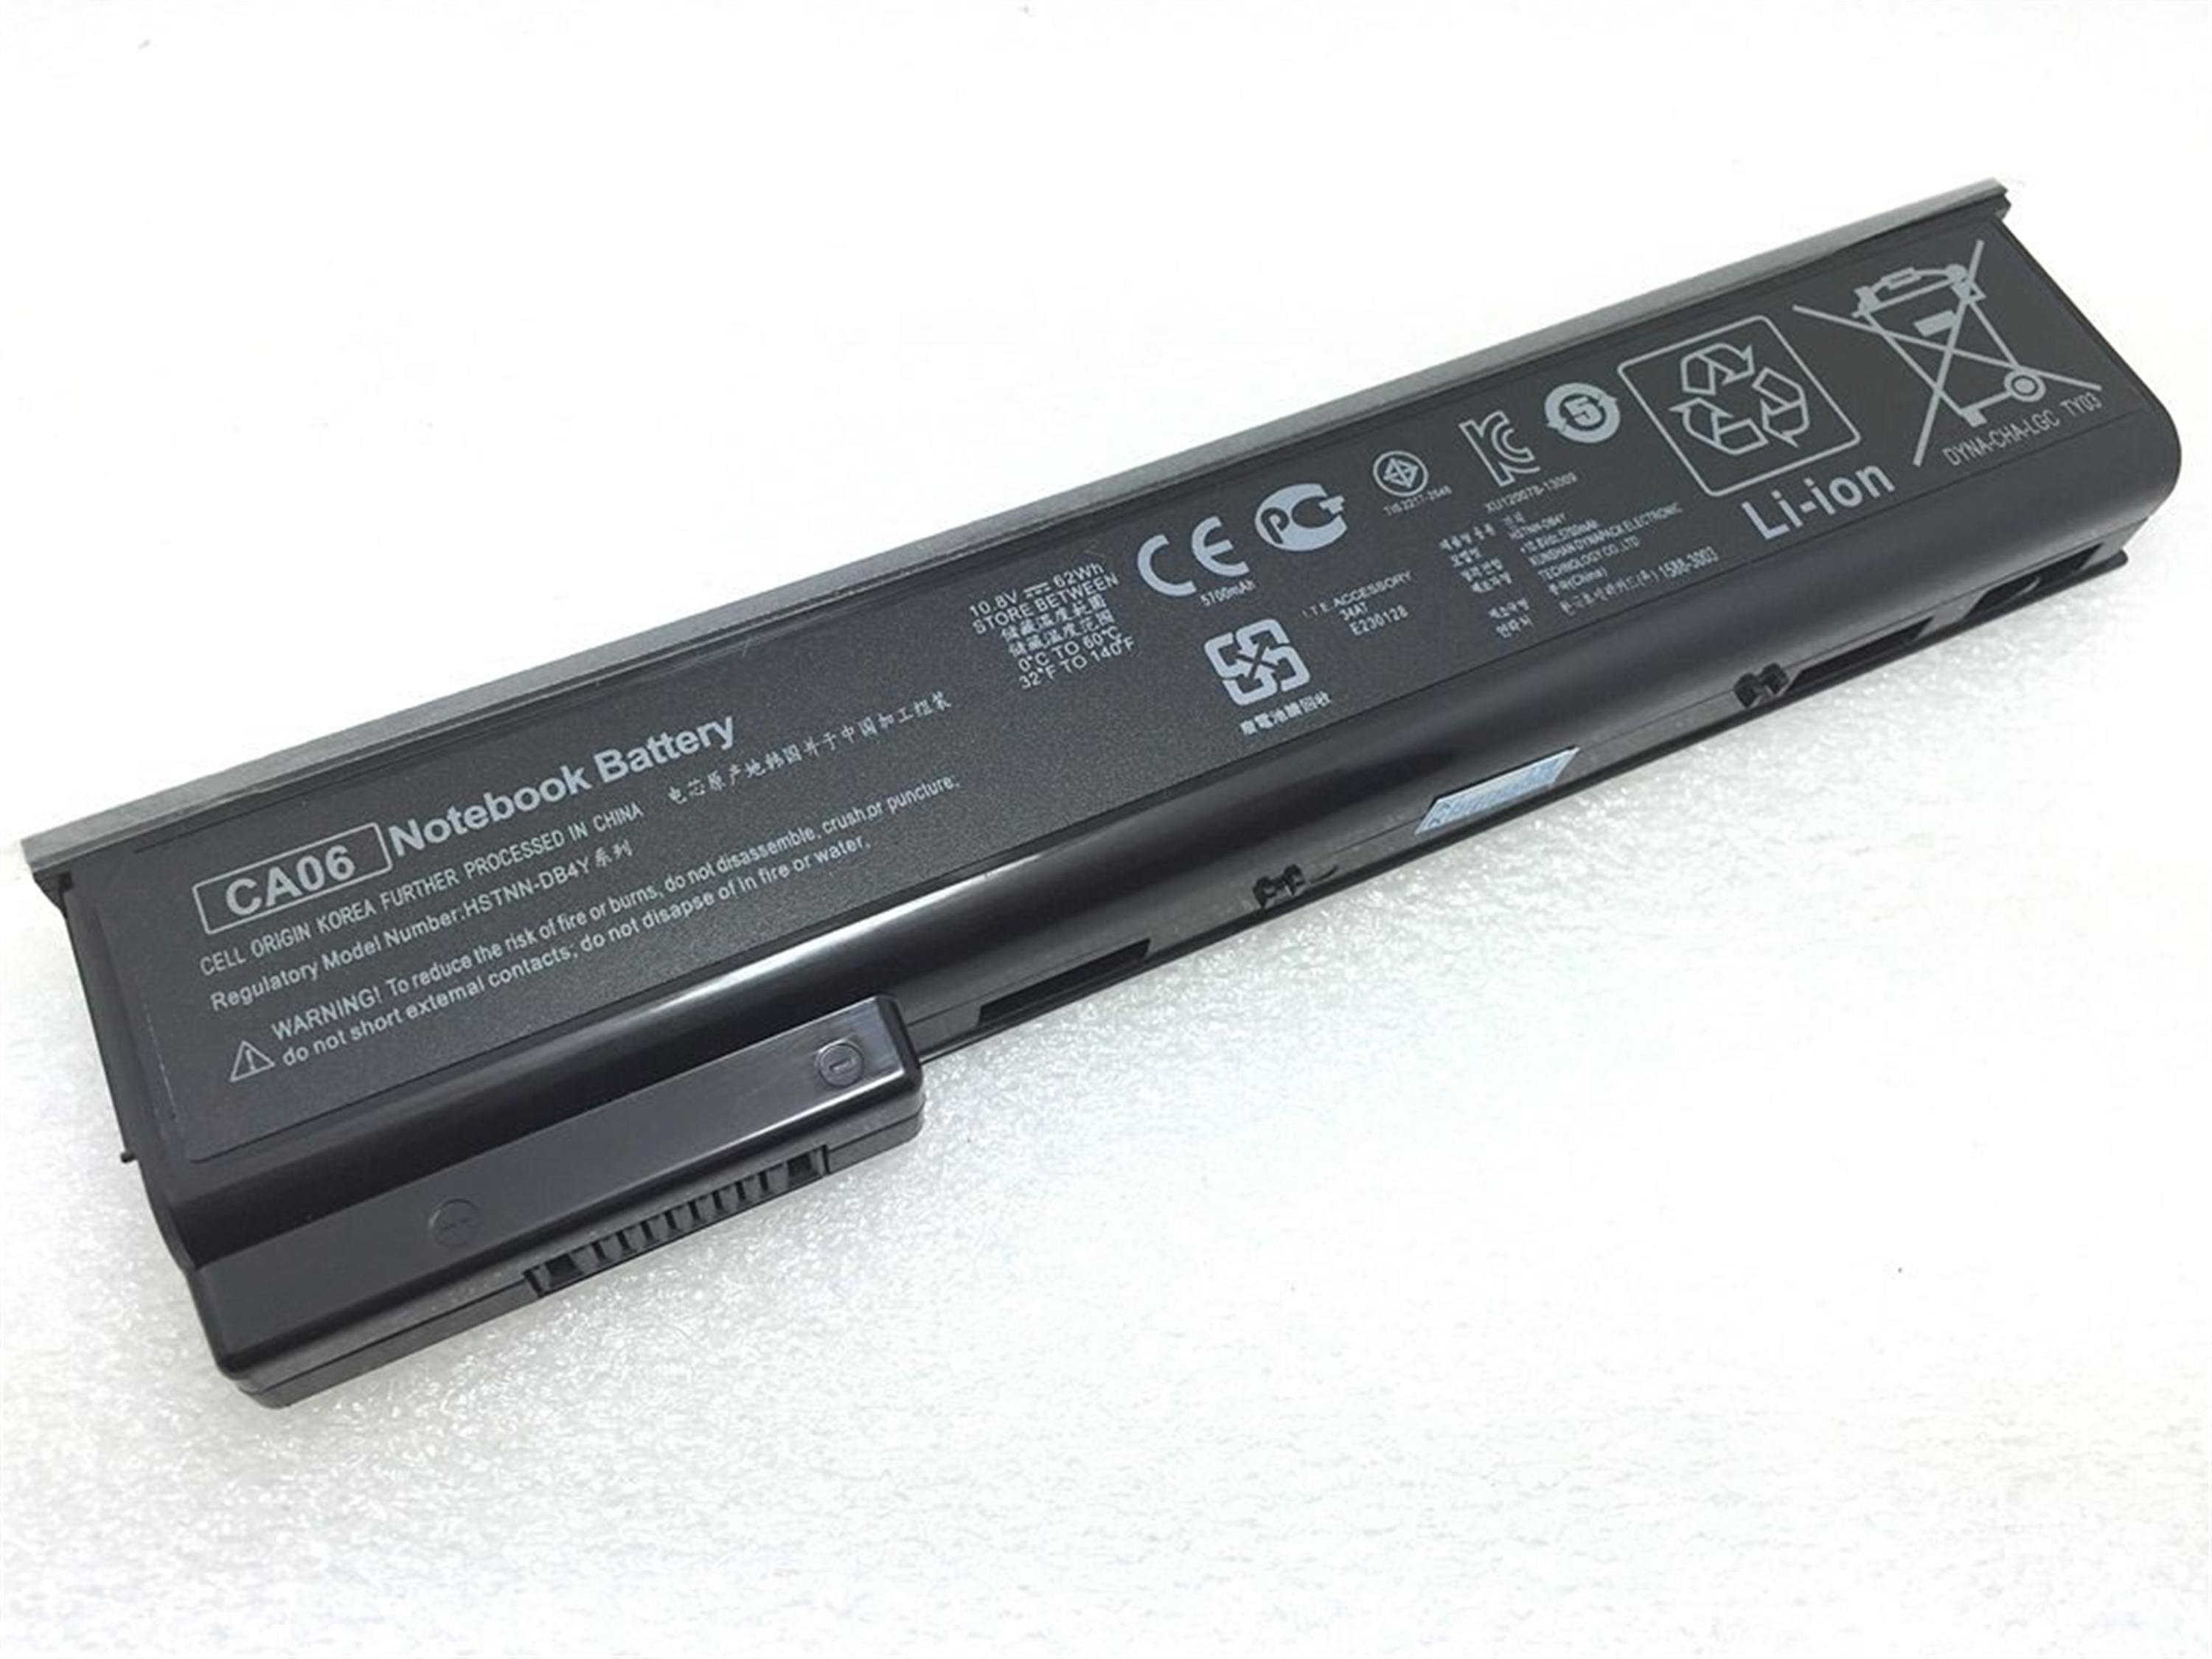 CA06 rechargeable lithium ion Notebook battery Laptop battery CA06XL CA09 10.8V 62Wh for HP laptop ProBook 640 645 650 655 G0 G1 series